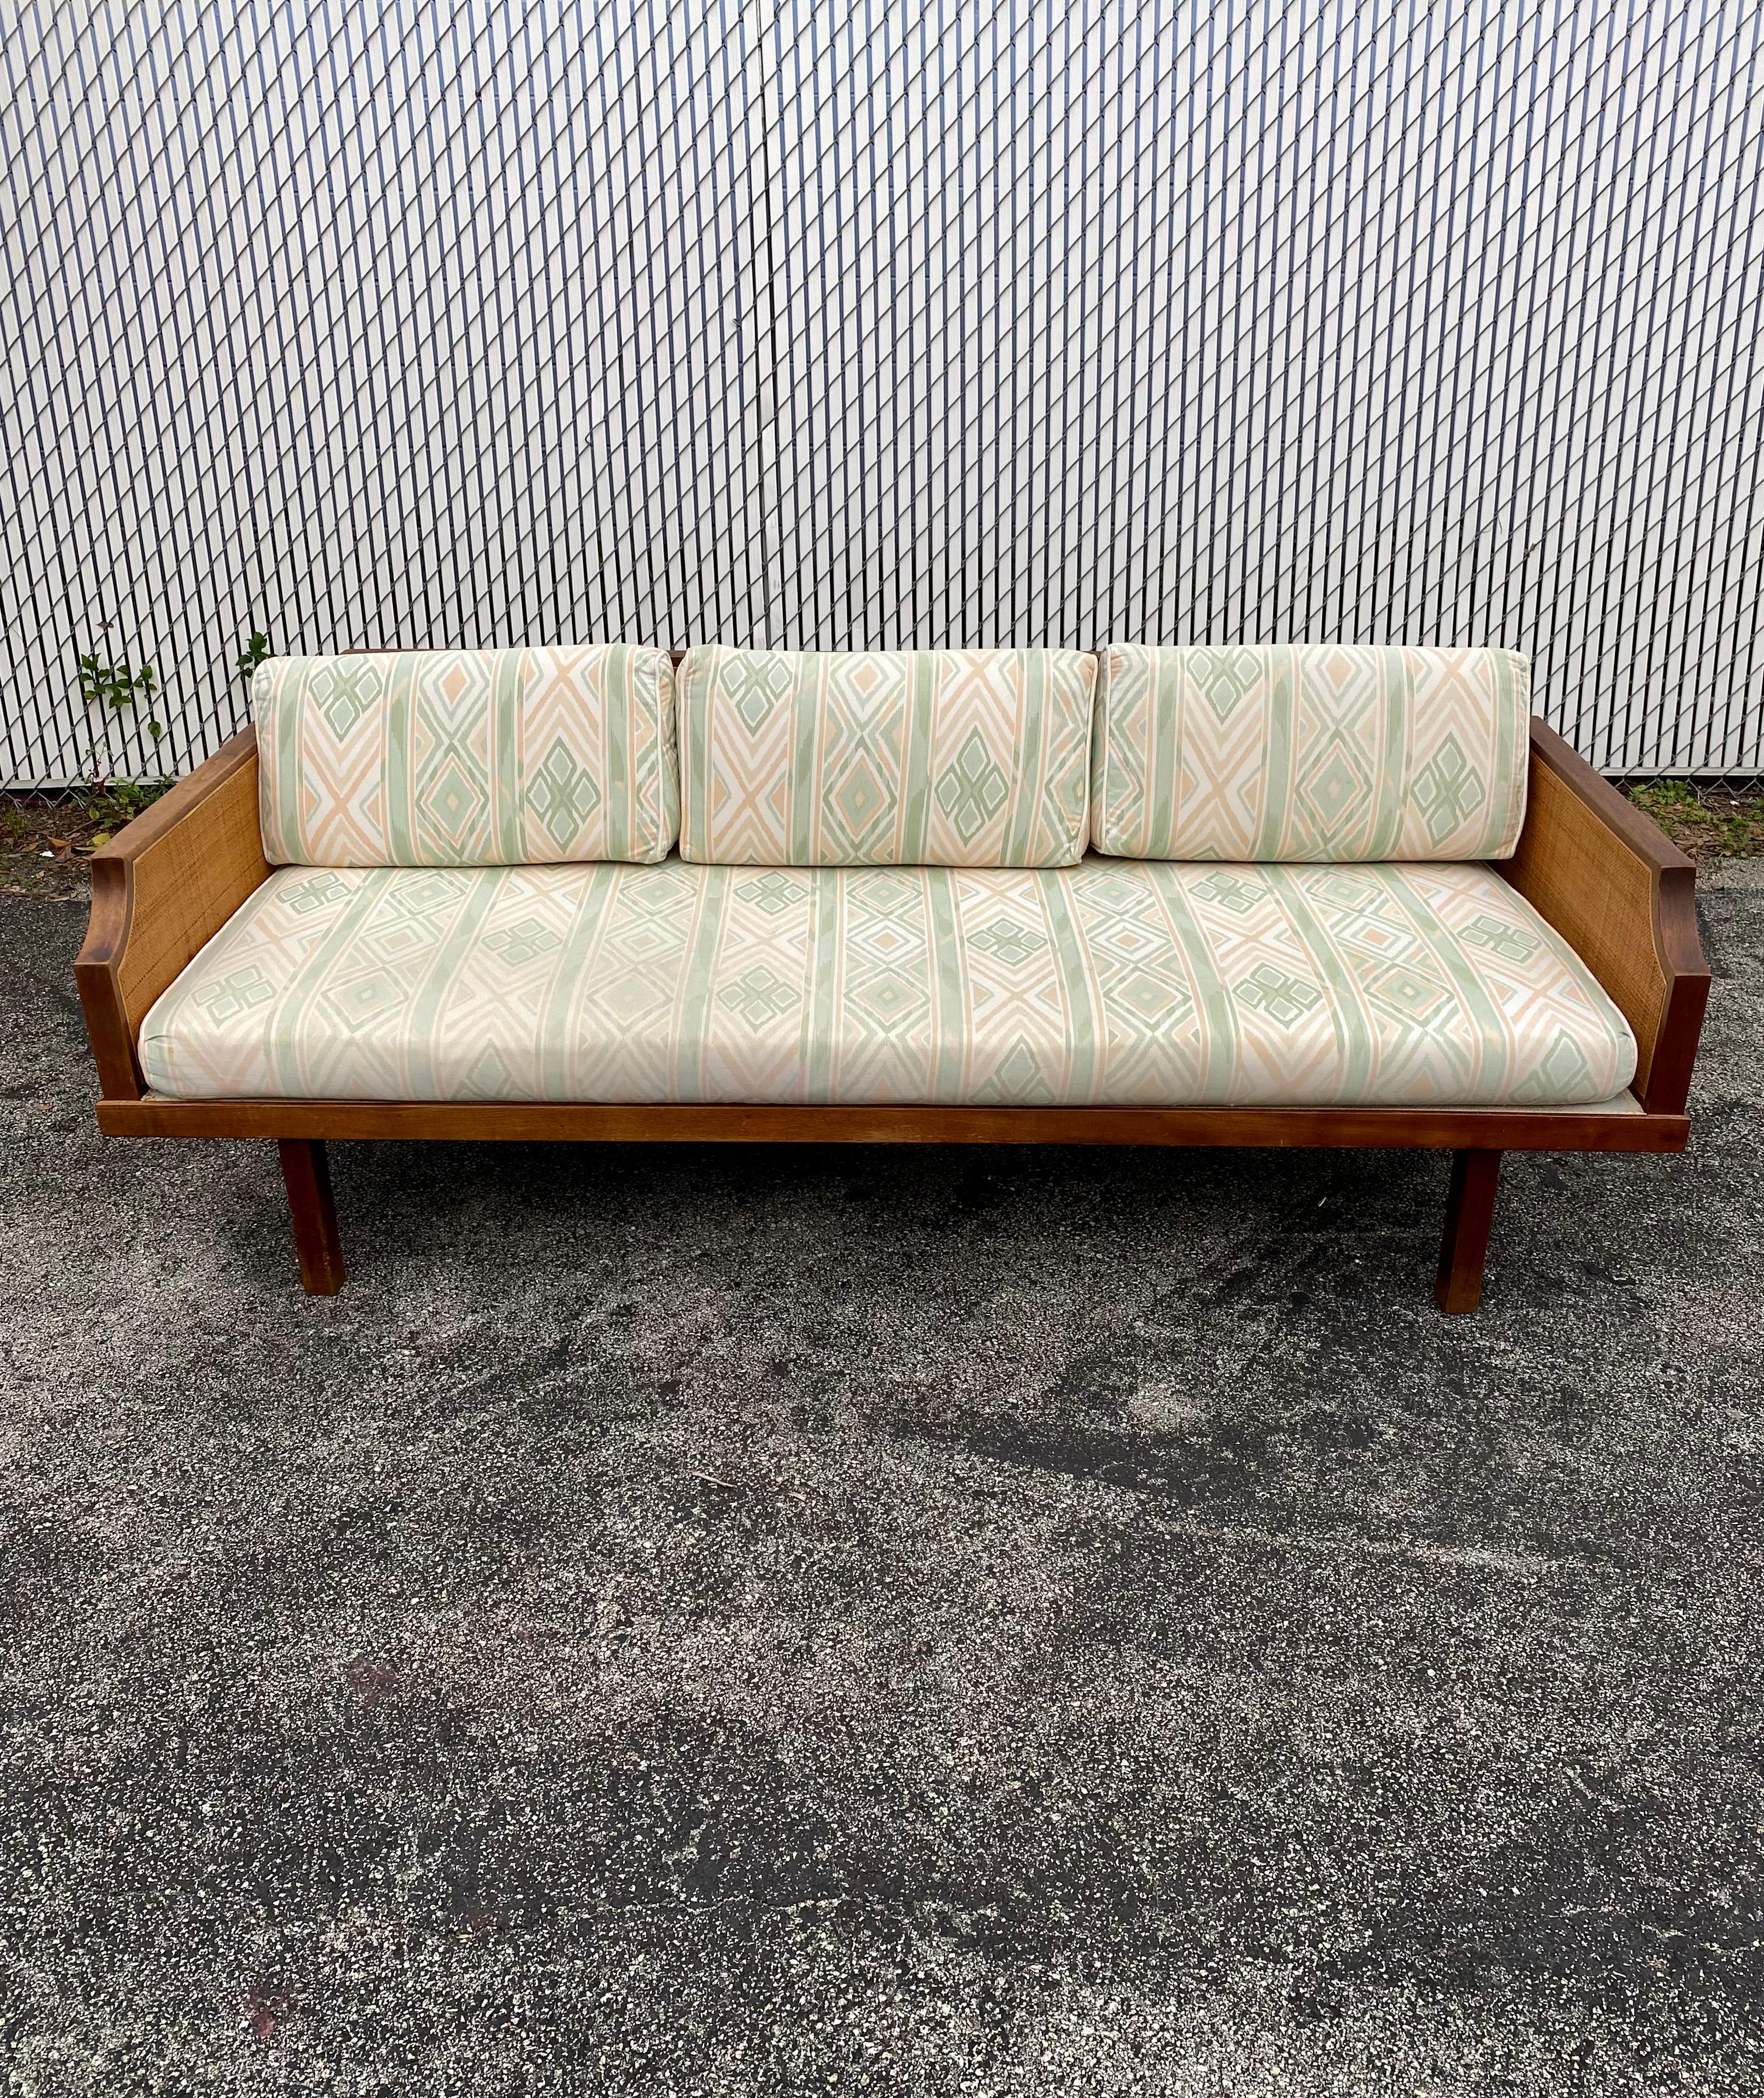 North American 1960s Mid-Century Teak Cane Sofa or Daybed